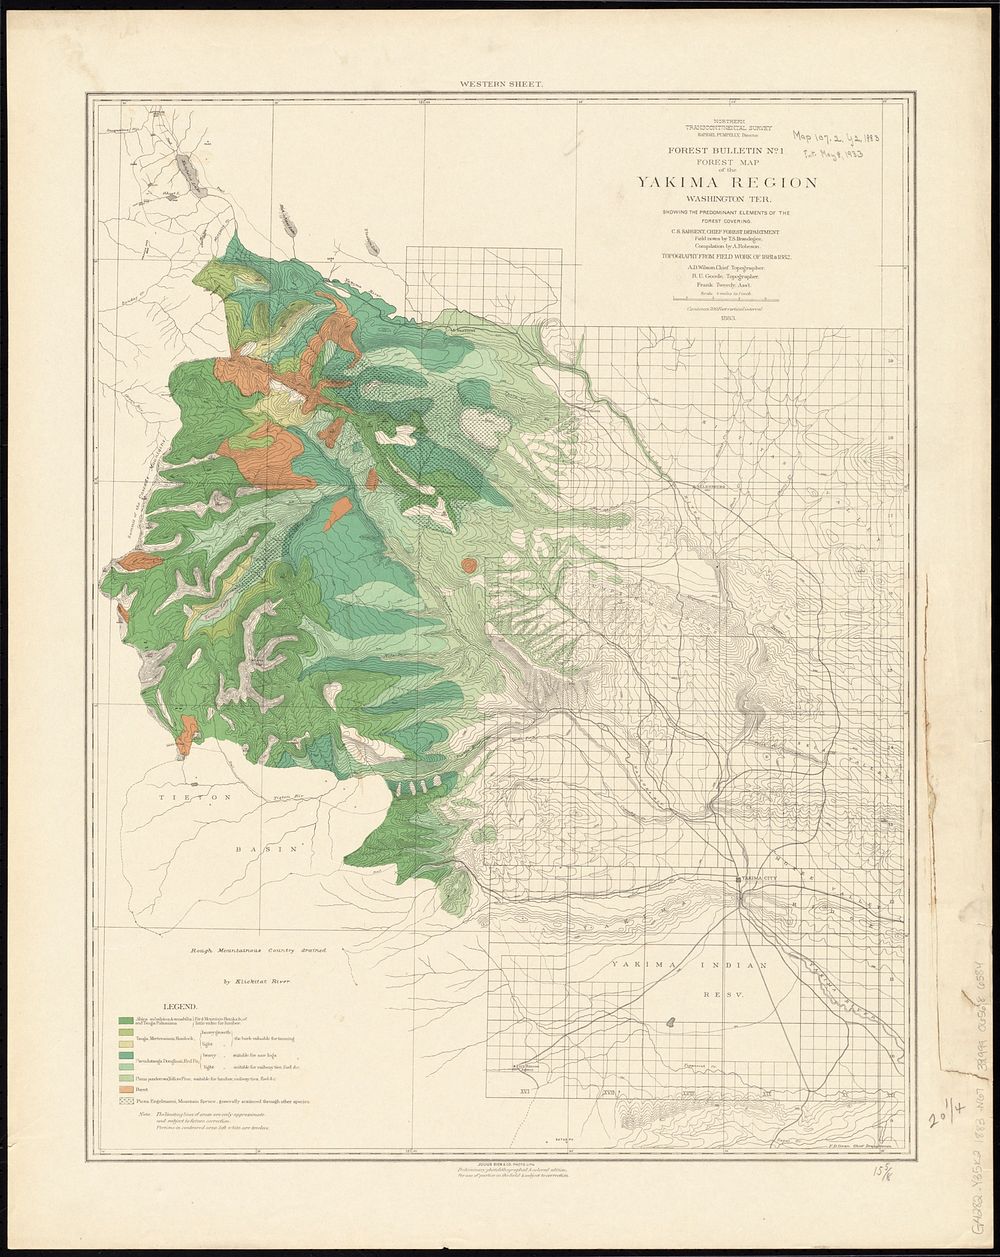             Forest map of the Yakima Region, Washington Ter. showing the predominant elements of the forest covering        …